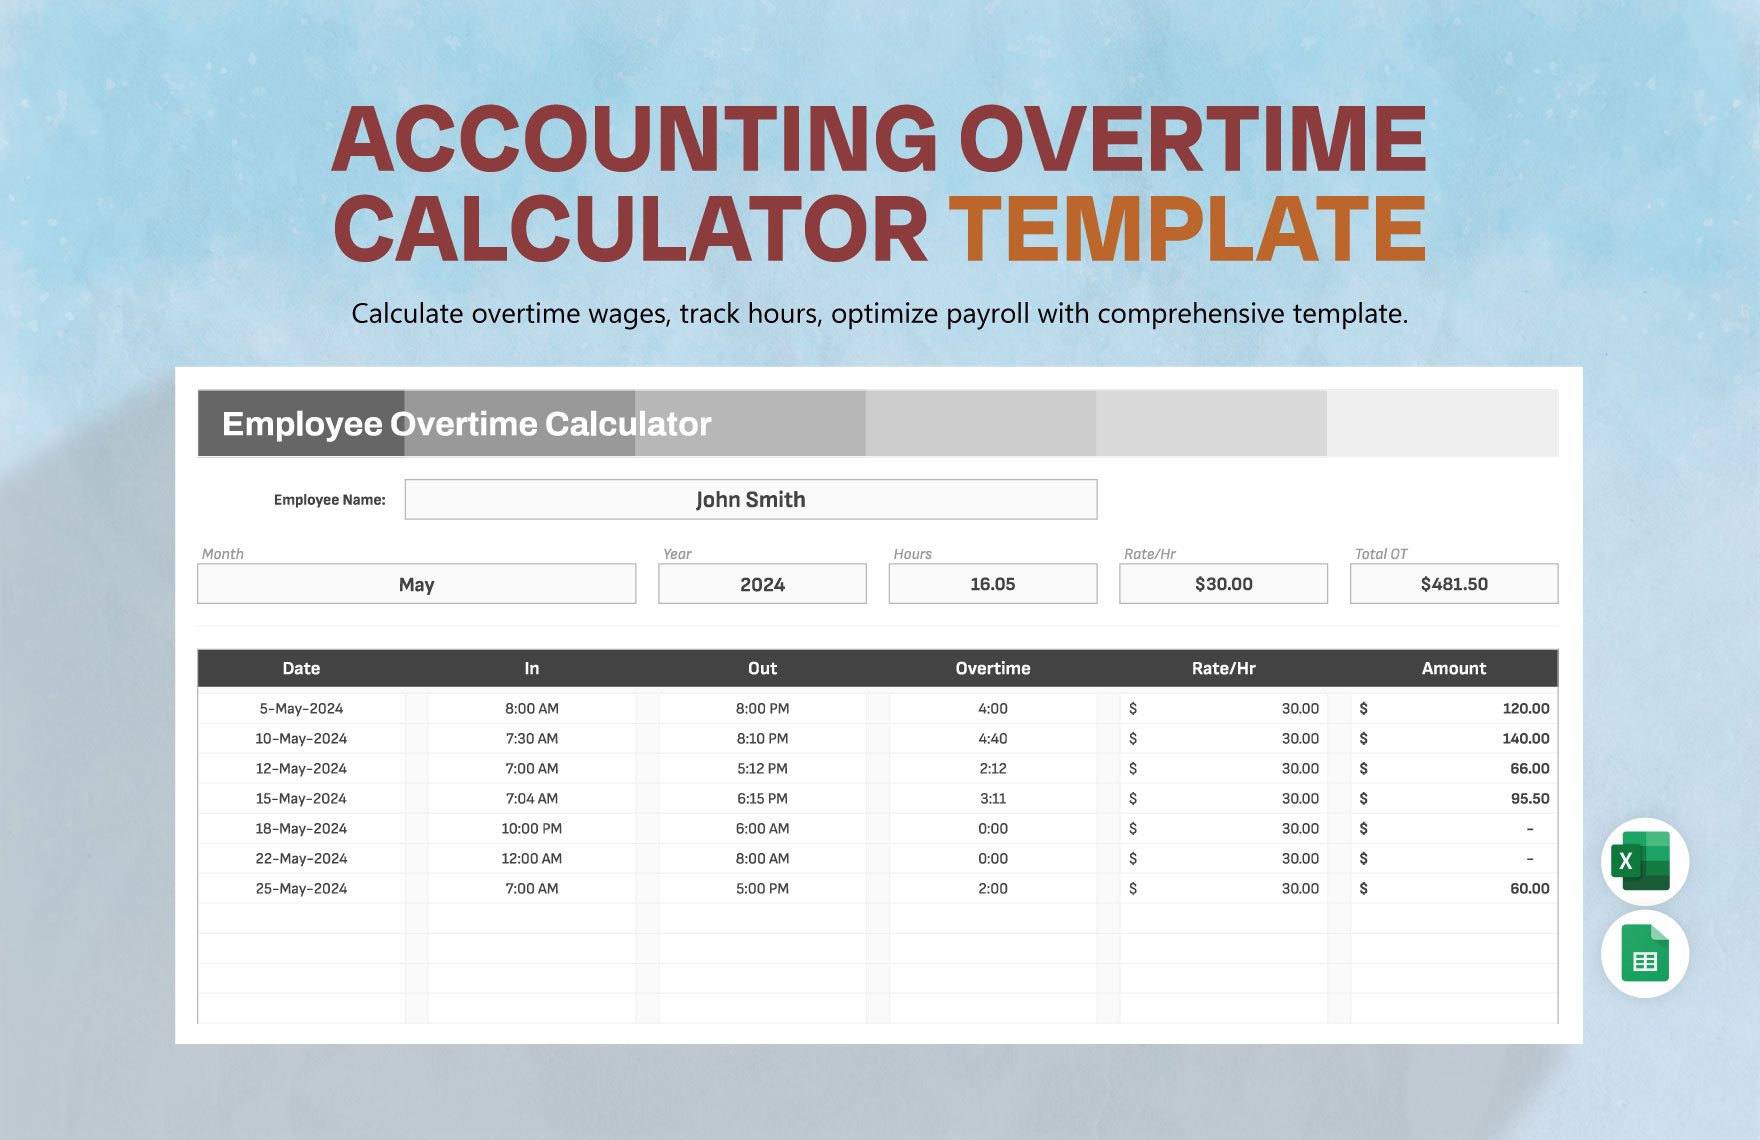 Accounting Overtime Calculator Template in Excel, Google Sheets